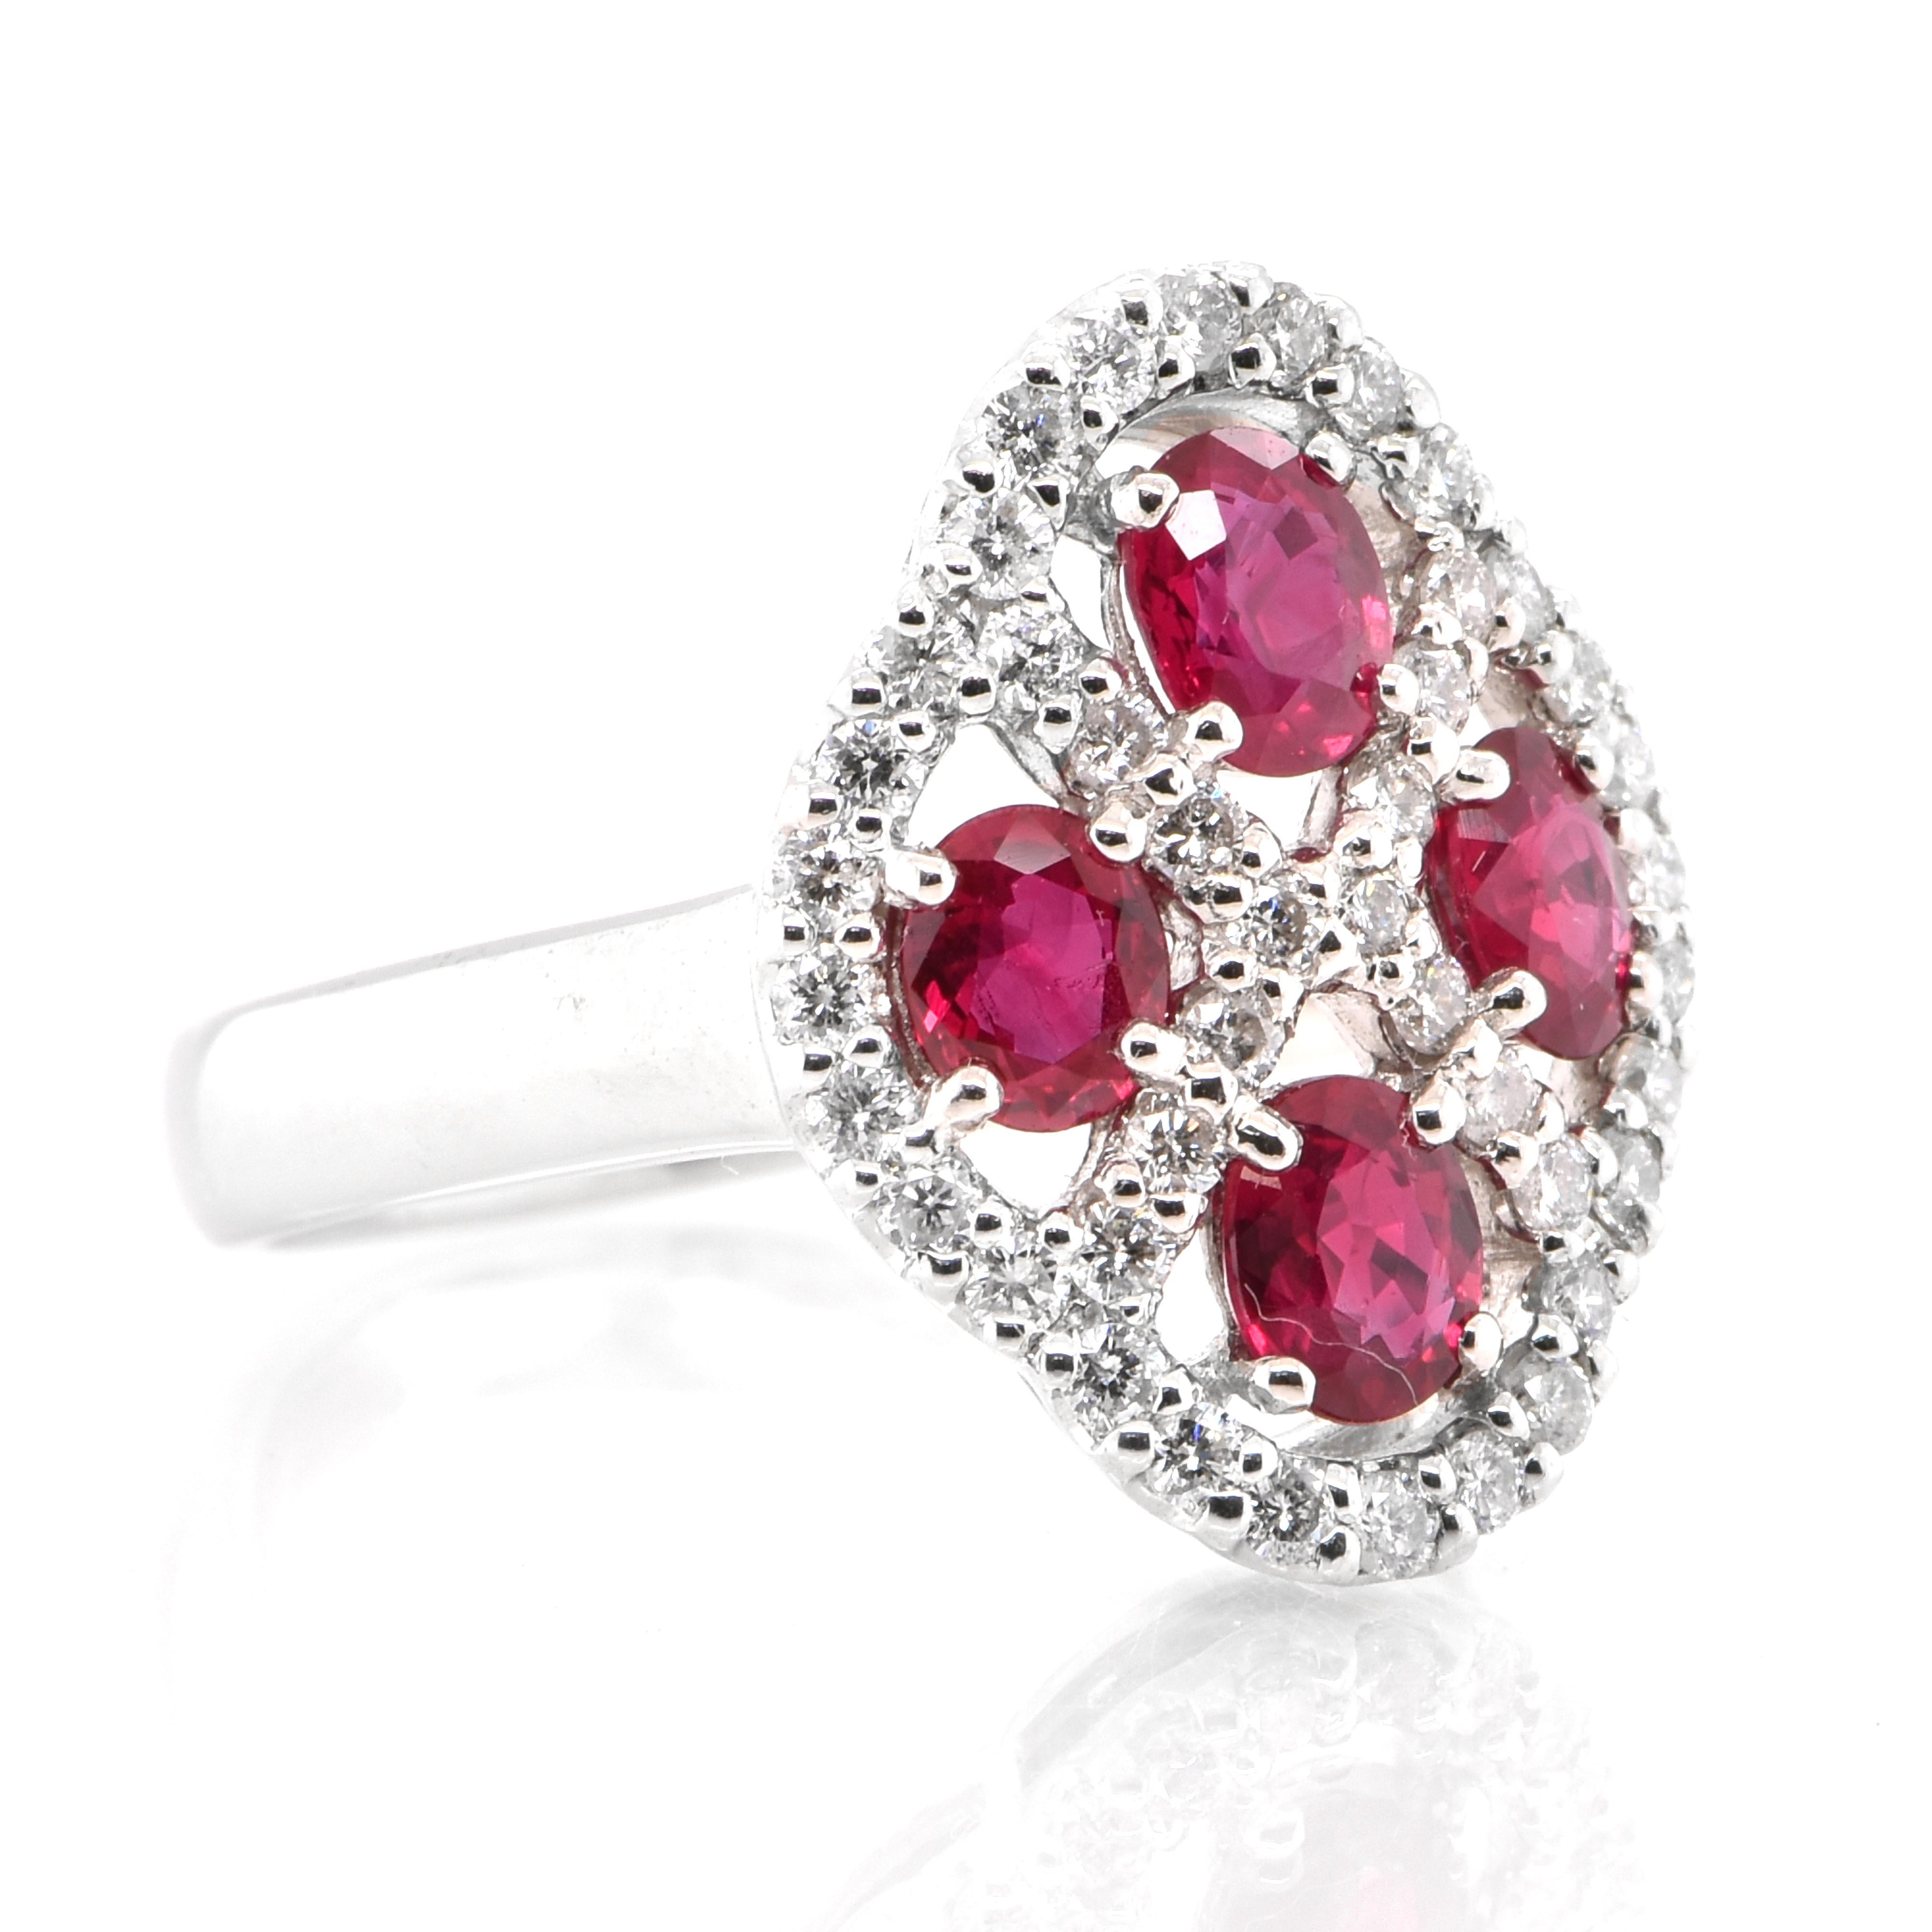 Modern 1.34 Carat Natural Rubies and Diamond Cocktail Ring Set in Platinum For Sale